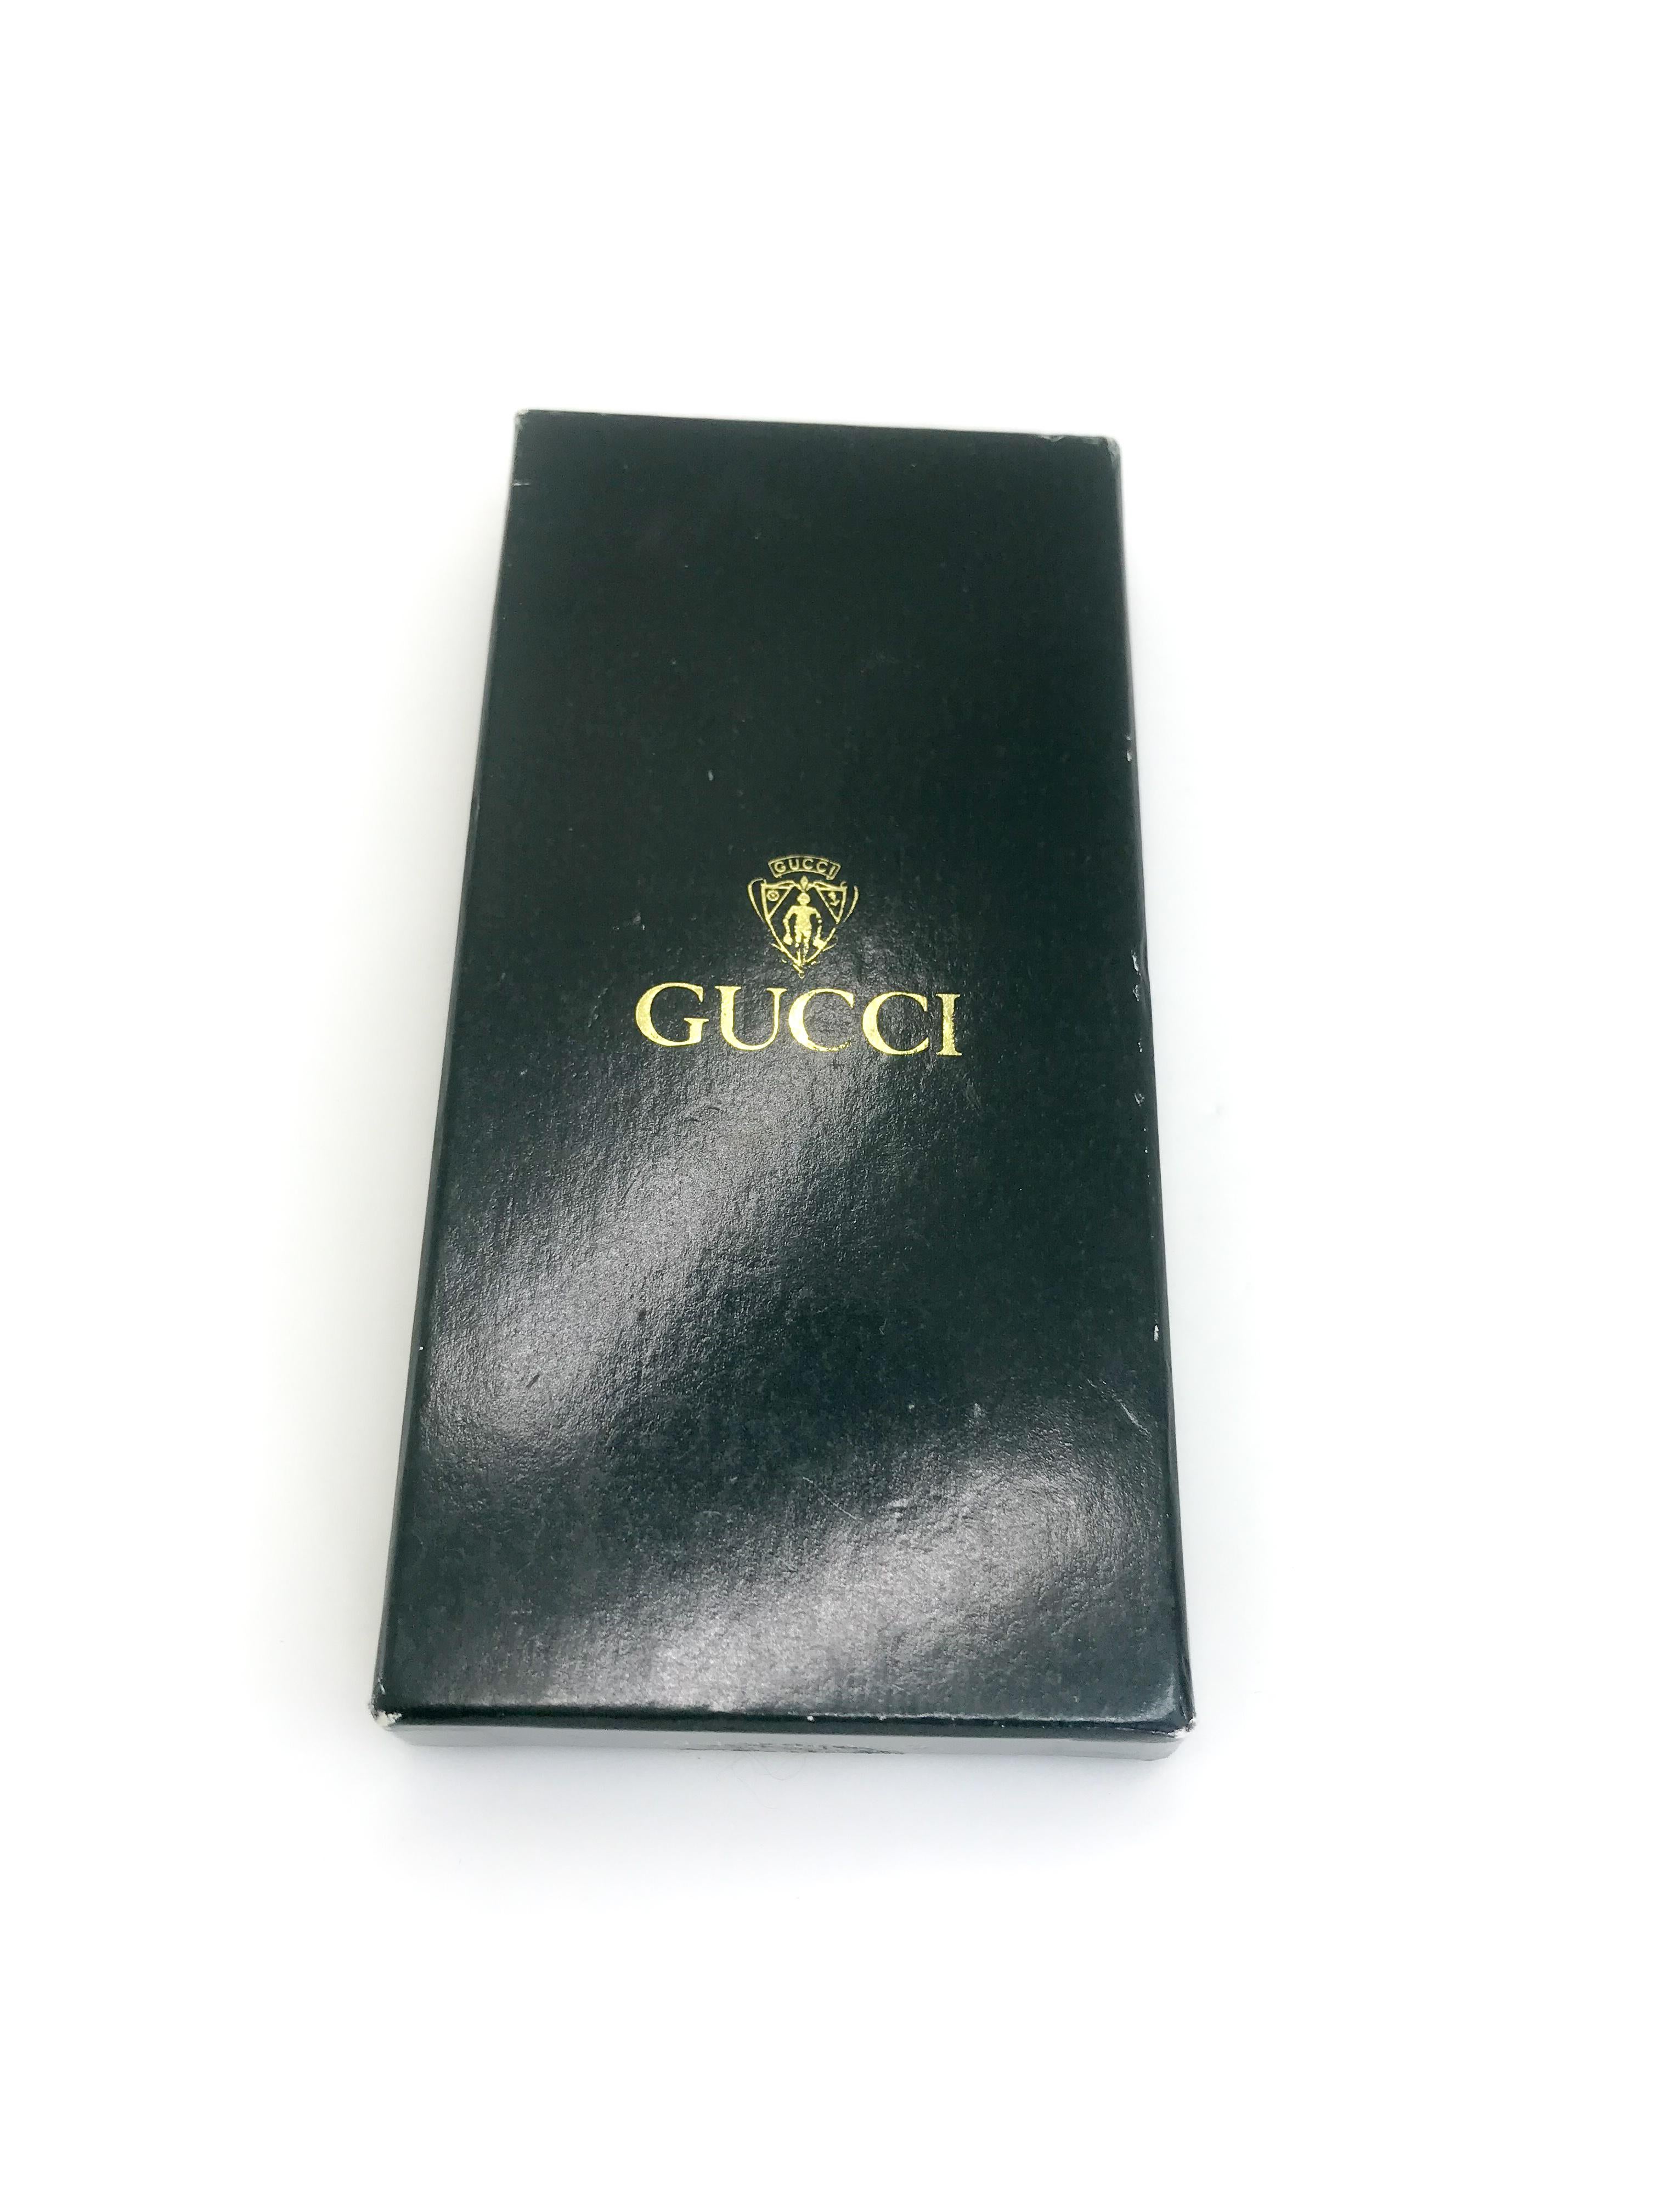 Gucci 1970s Vintage Keyring.   Unworn with original box.  Still with tag!.

Stamped made in Italy on reverse.

This is a rare find.  A true Gucci lovers collectors piece.

Pretty much mint condition overall.  A very minor green mark on front of